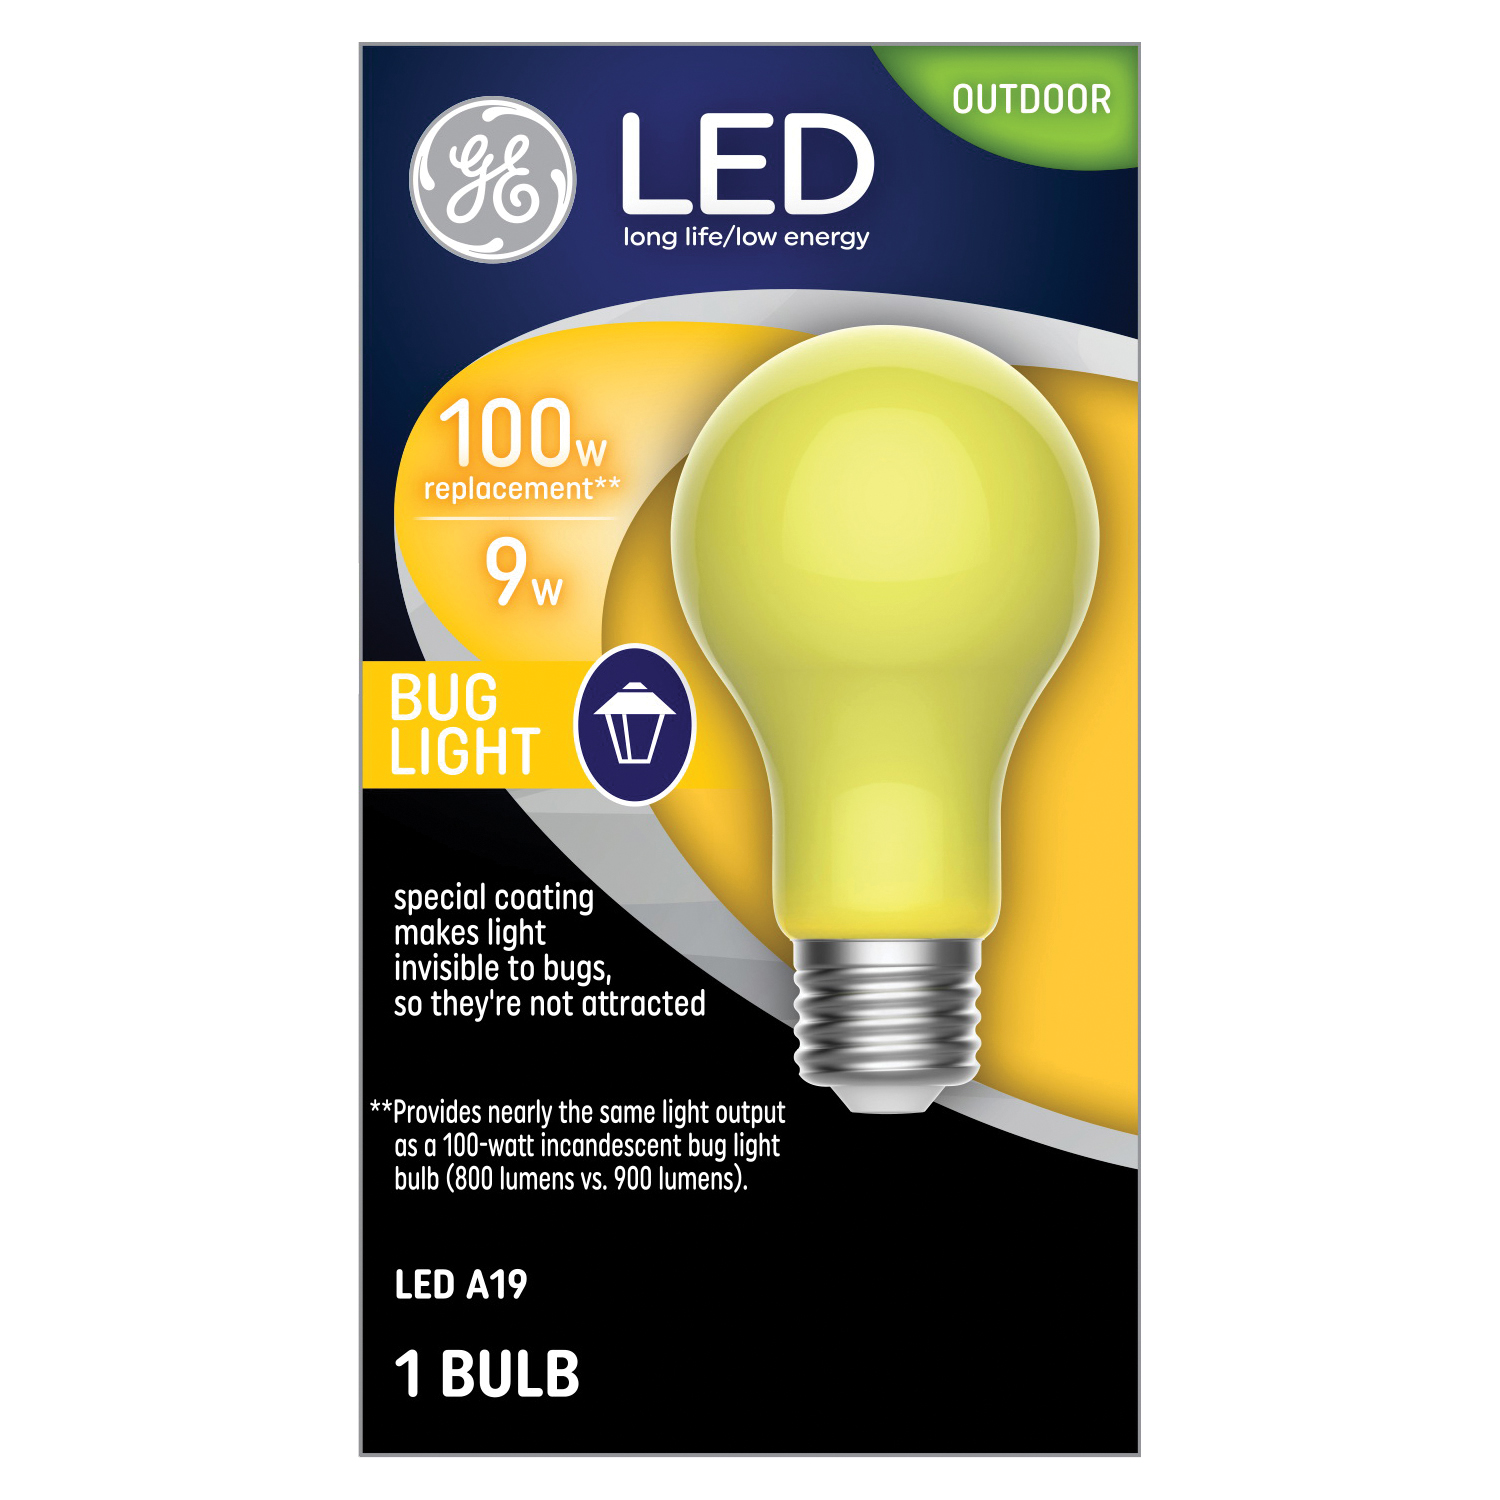 93129711 LED Bulb, Bug, Outdoor, 100 W Equivalent, Medium Lamp Base, Non-Dimmable, Warm White Light